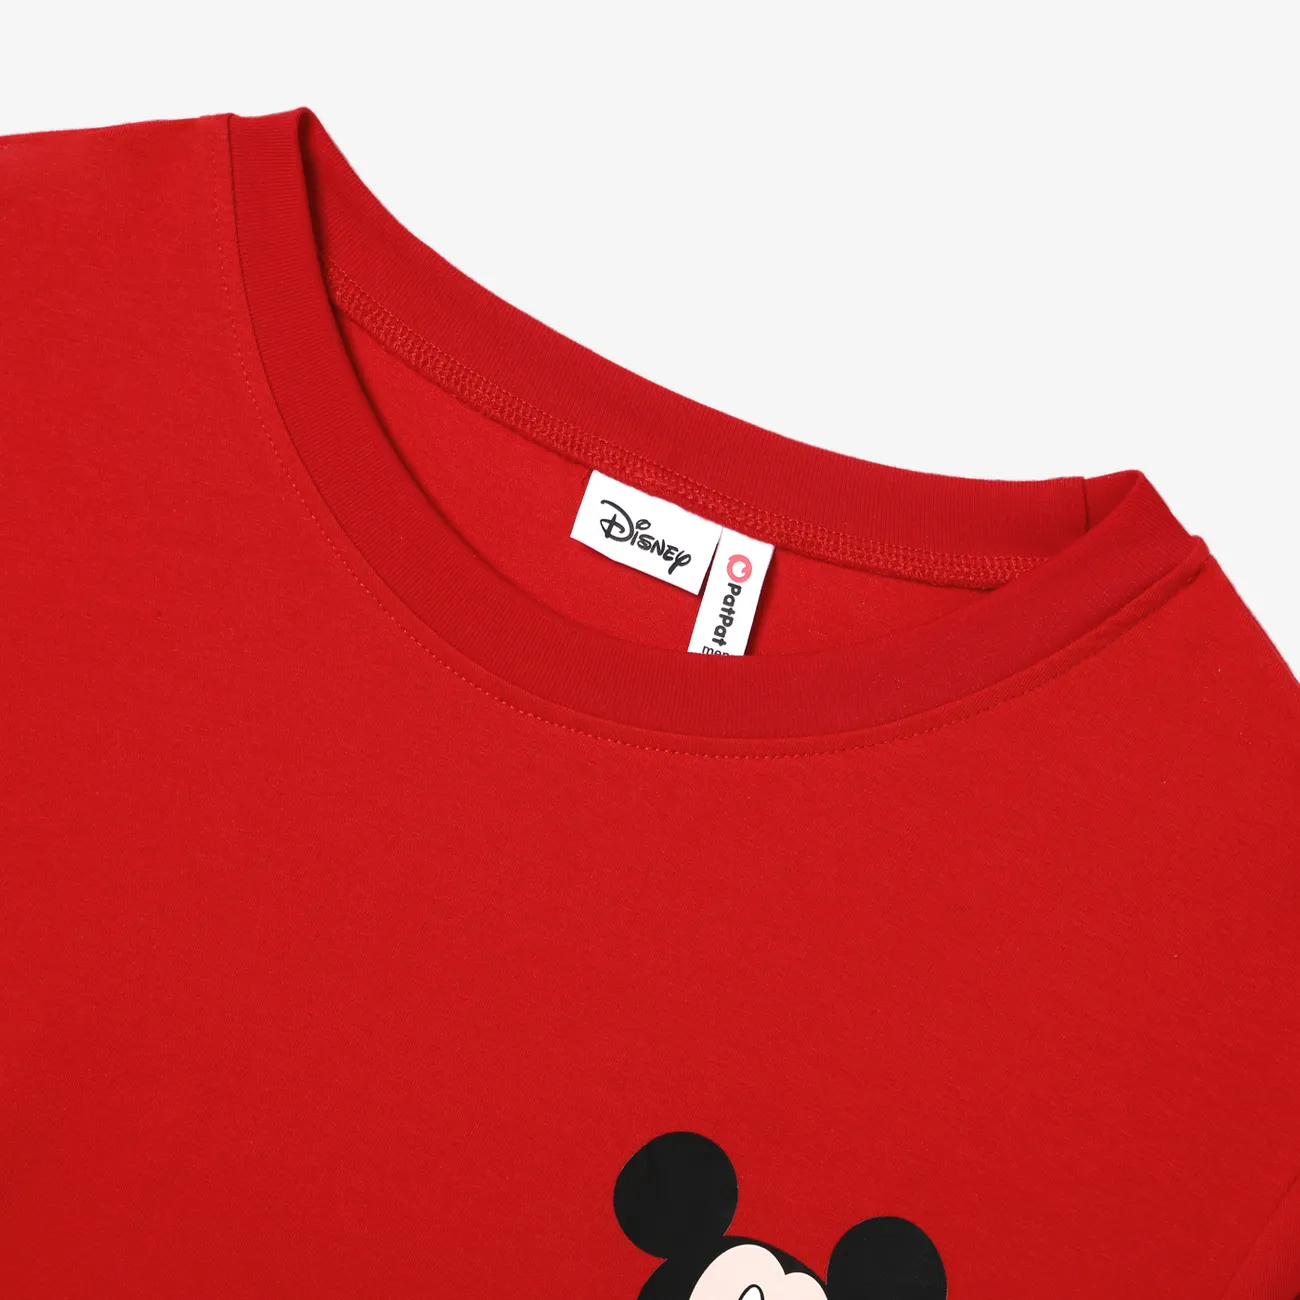 Disney Mickey and Friends Look Familial Manches longues Tenues de famille assorties Ensemble Rouge big image 1